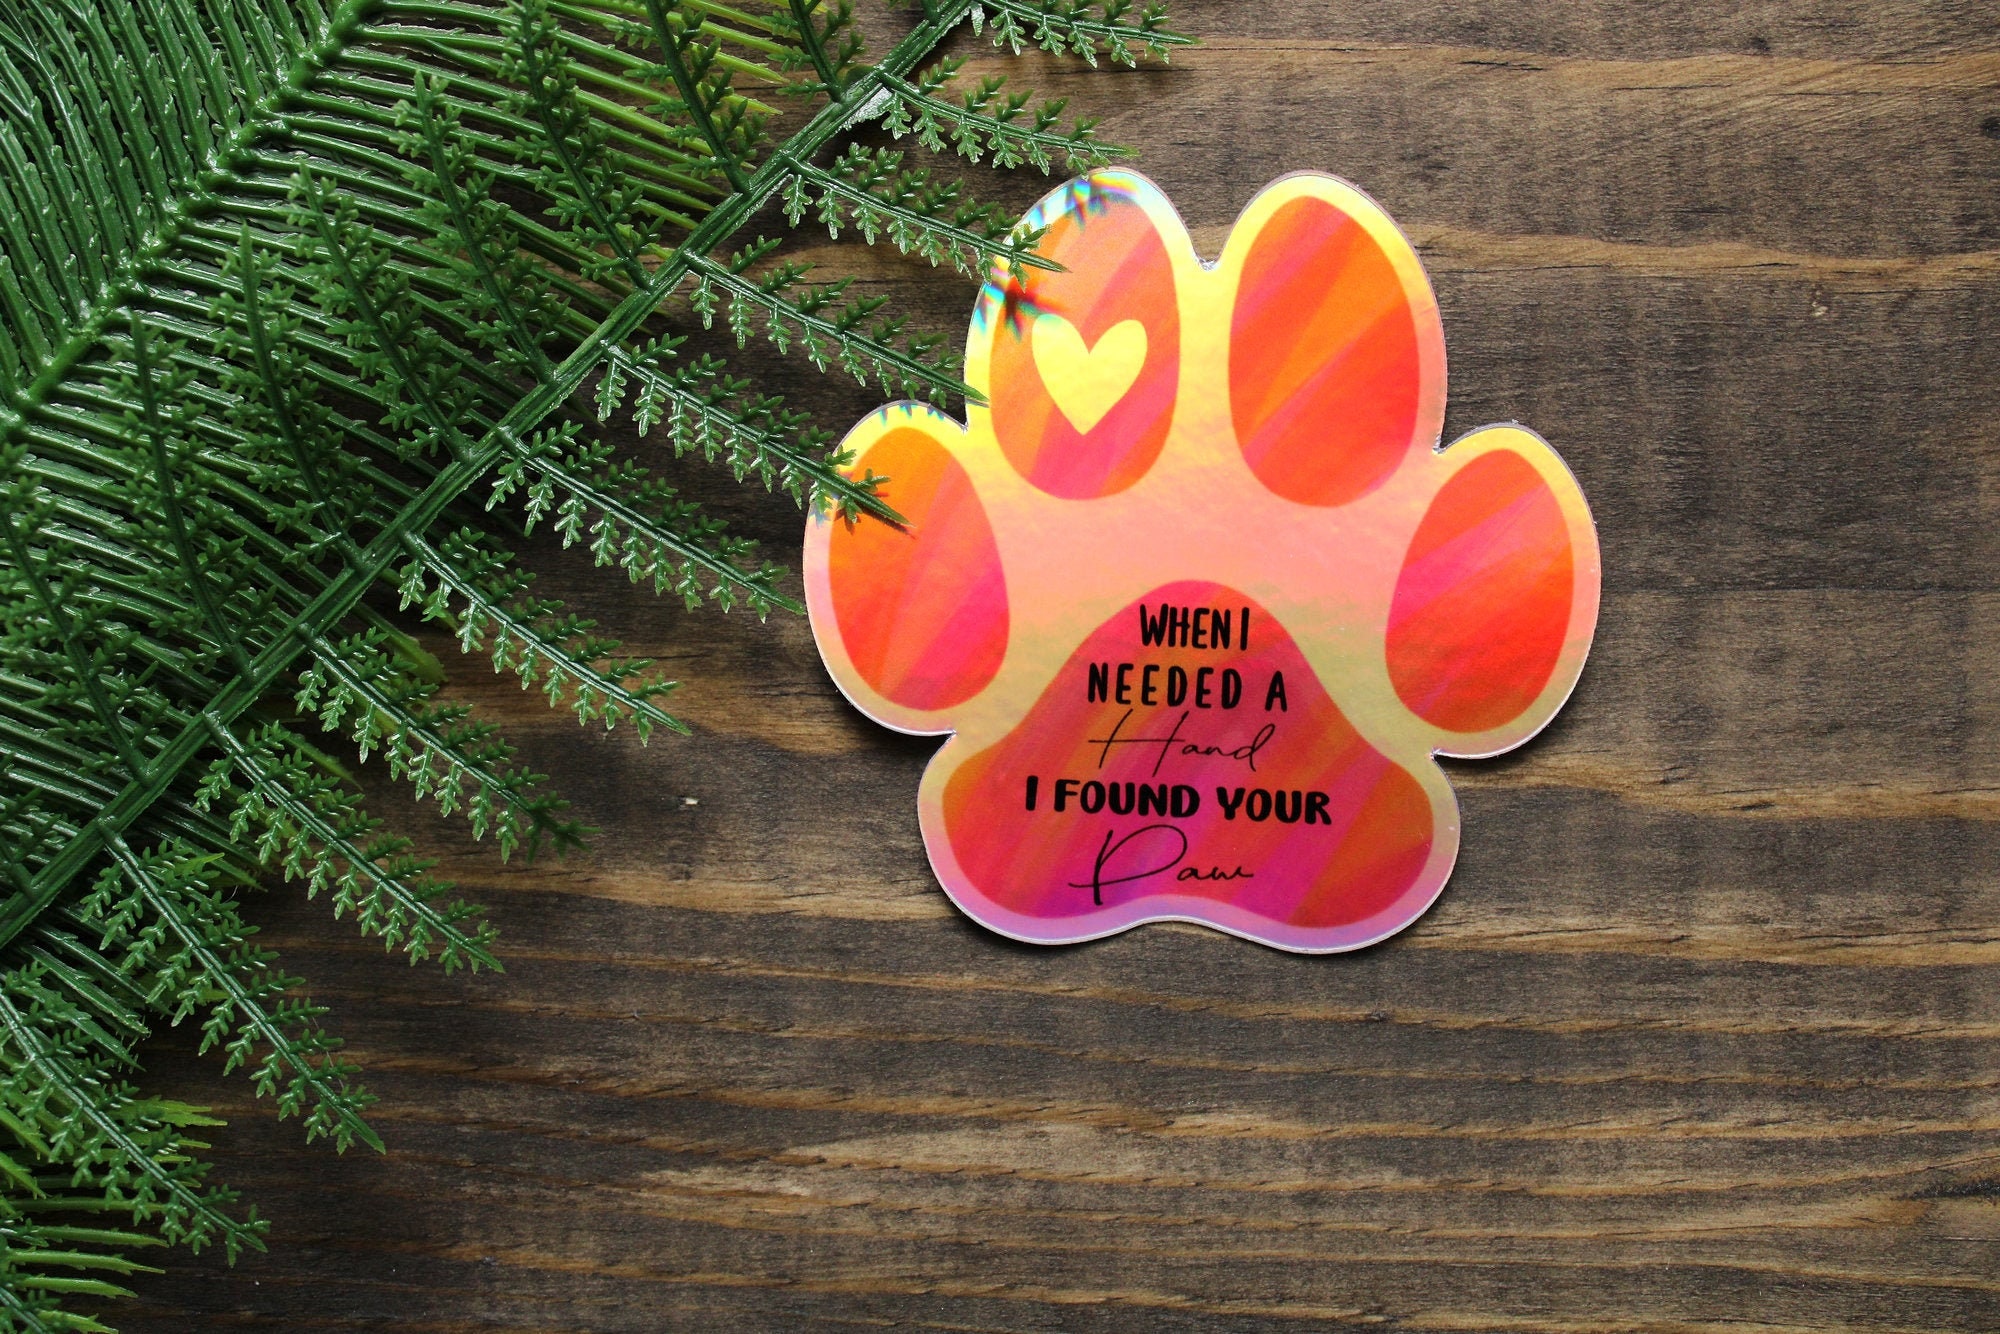 Paw Print Quote Sticker  When I needed a hand I found your paw  Pink Holographic Sticker